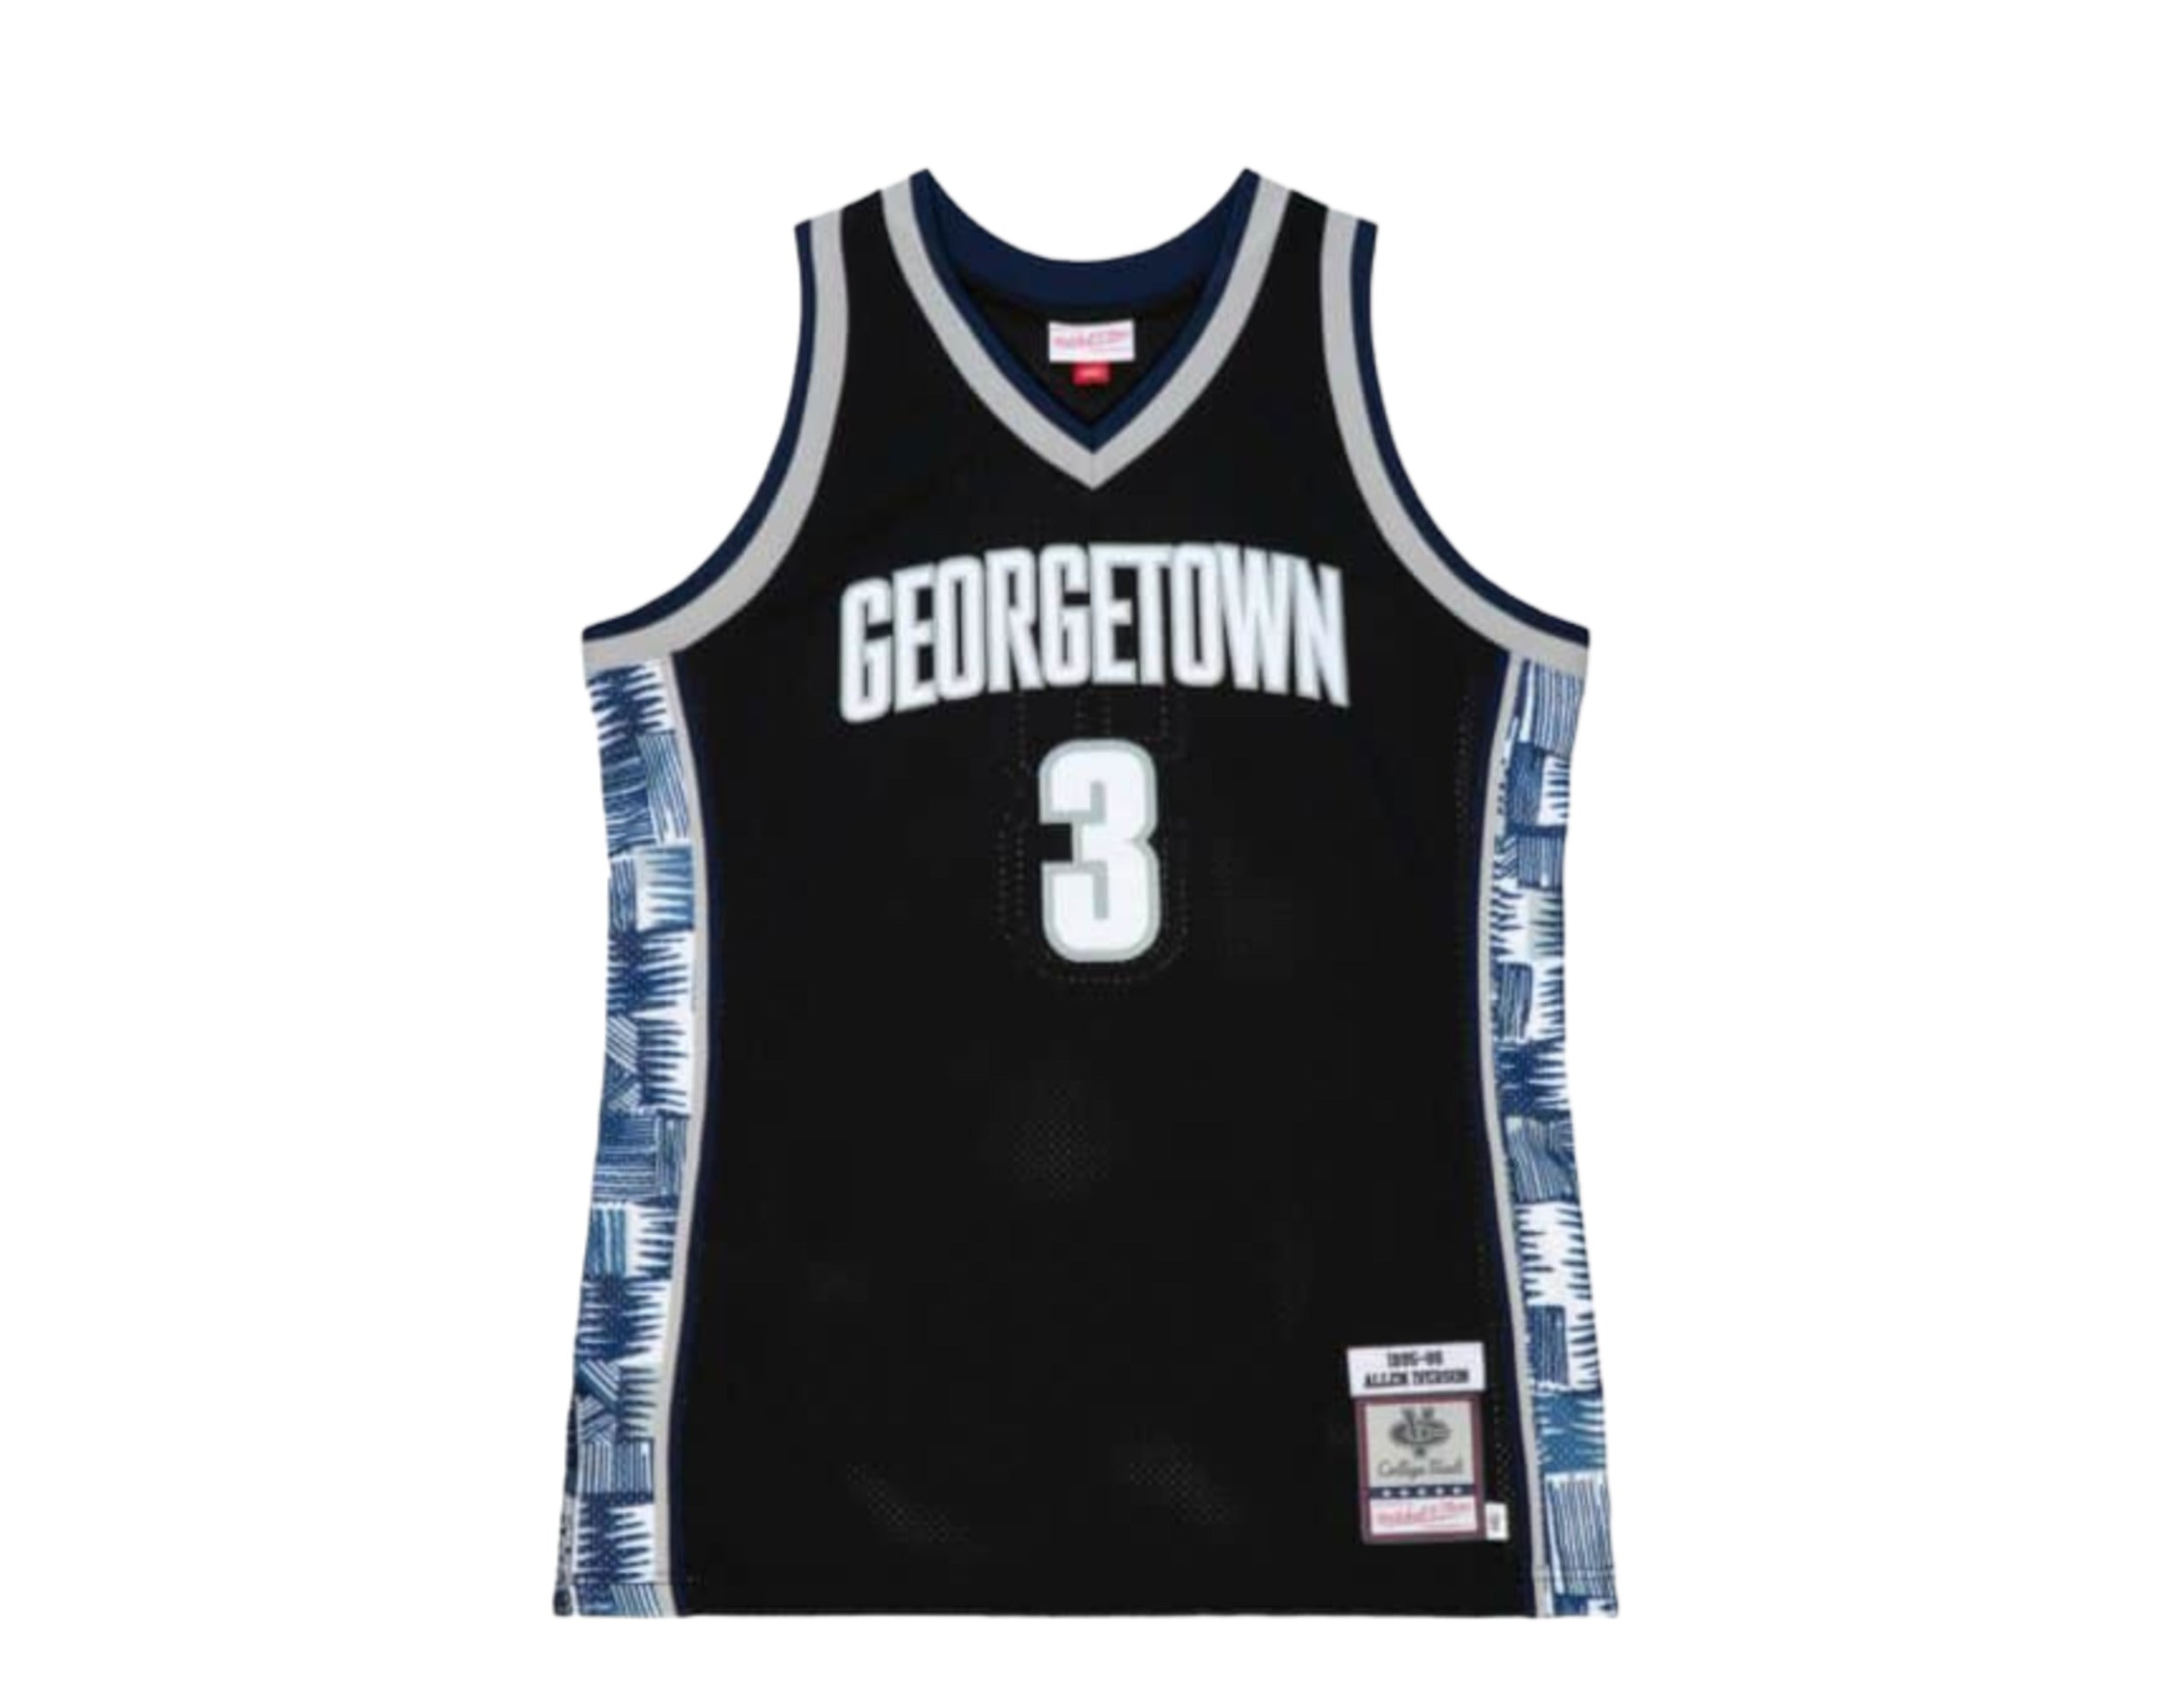 Georgetown University Jerseys and Apparel from Mitchell & Ness Mitchell &  Ness Nostalgia Co.